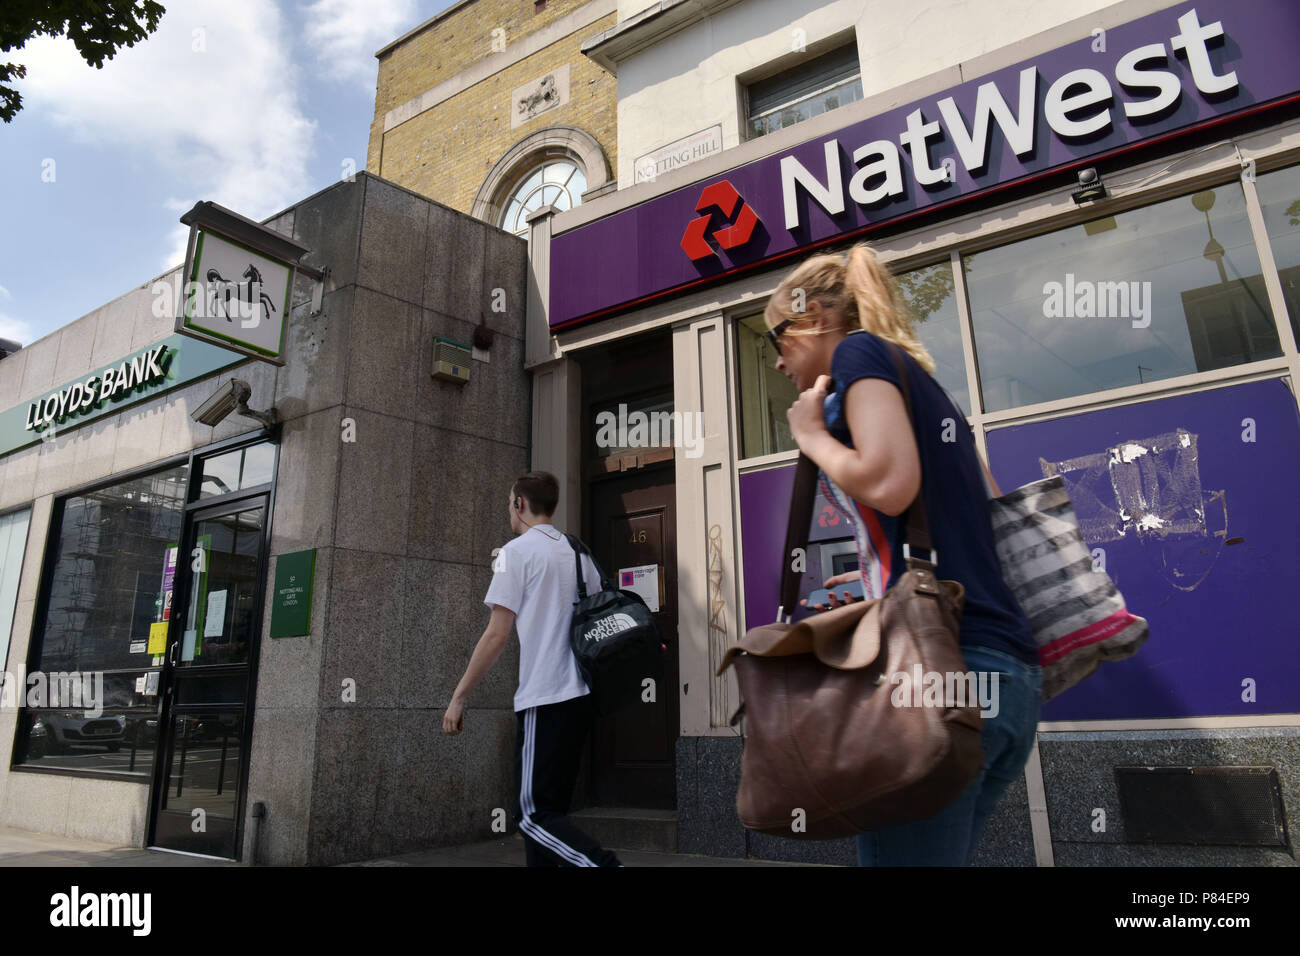 People walk past the branches of NatWest and Lloyds banks in Notting Hill London Stock Photo